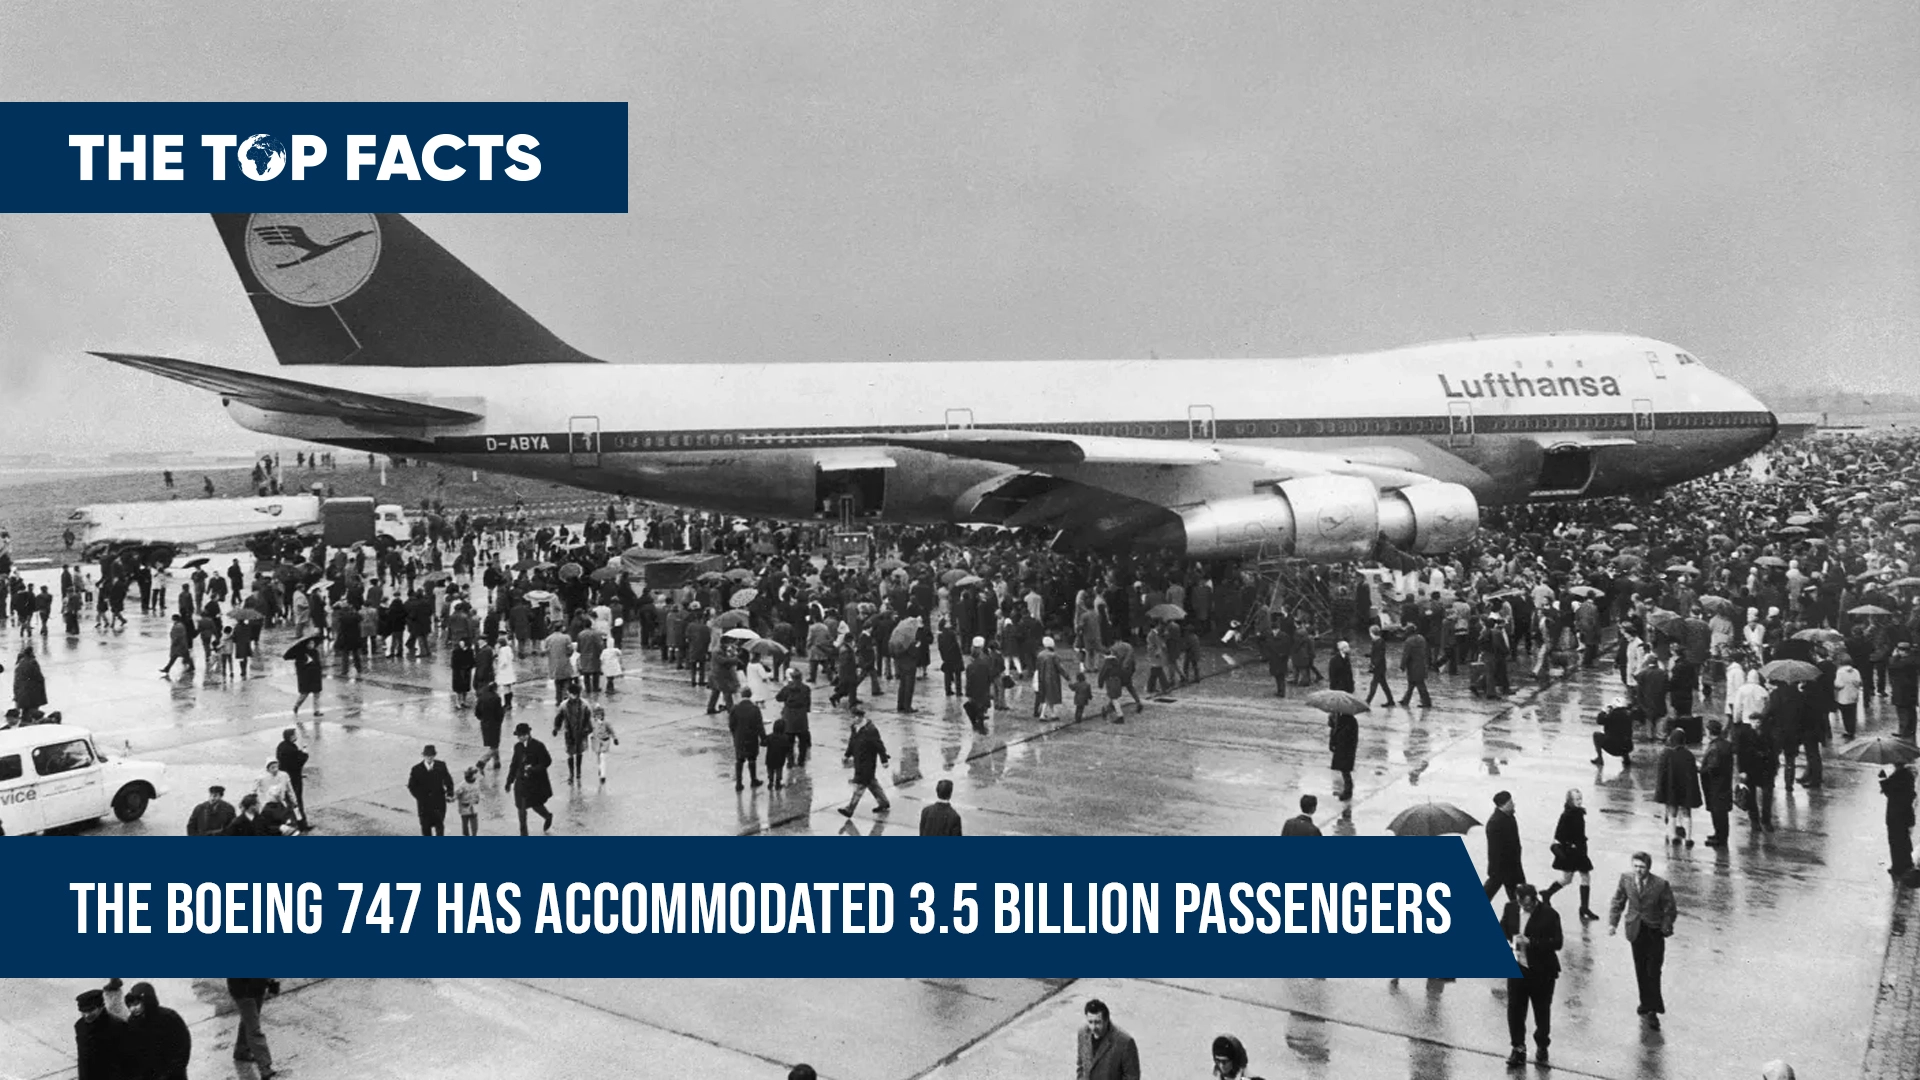 The Boeing 747 aircraft has carried a total of 3.5 billion passengers over its lifetime.